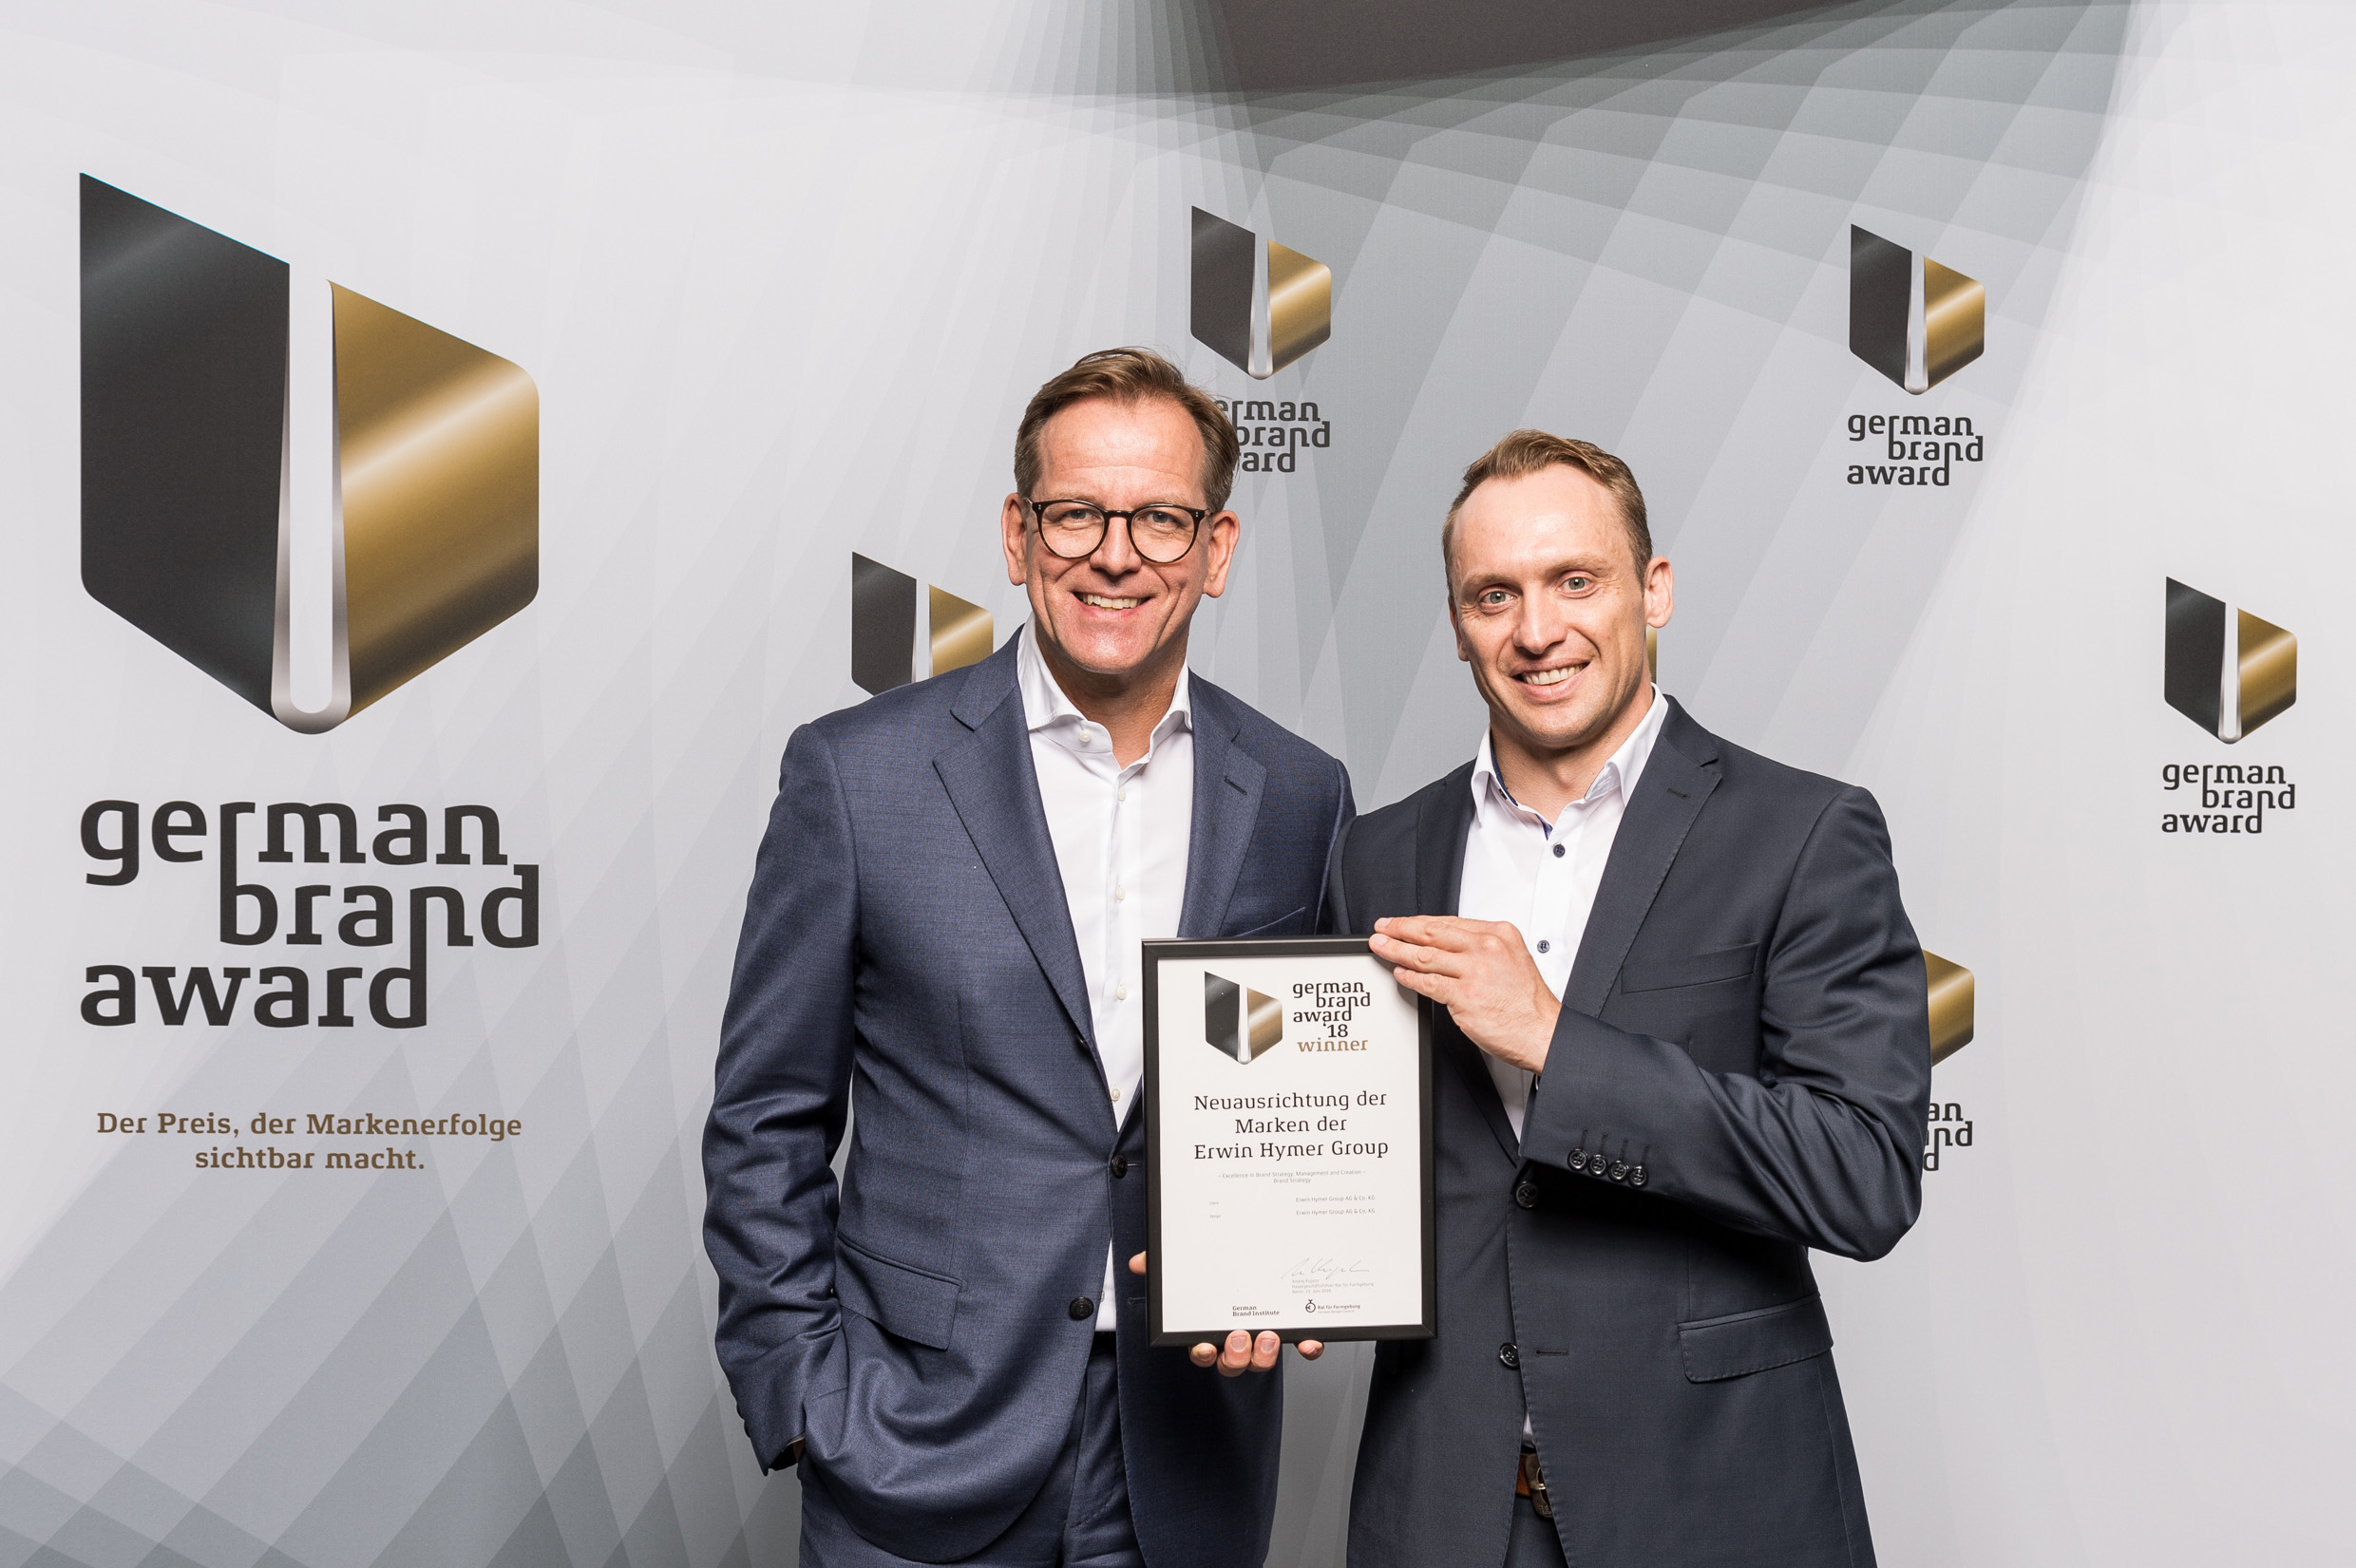 Erwin Hymer Group receives the German Brand Award for brand management